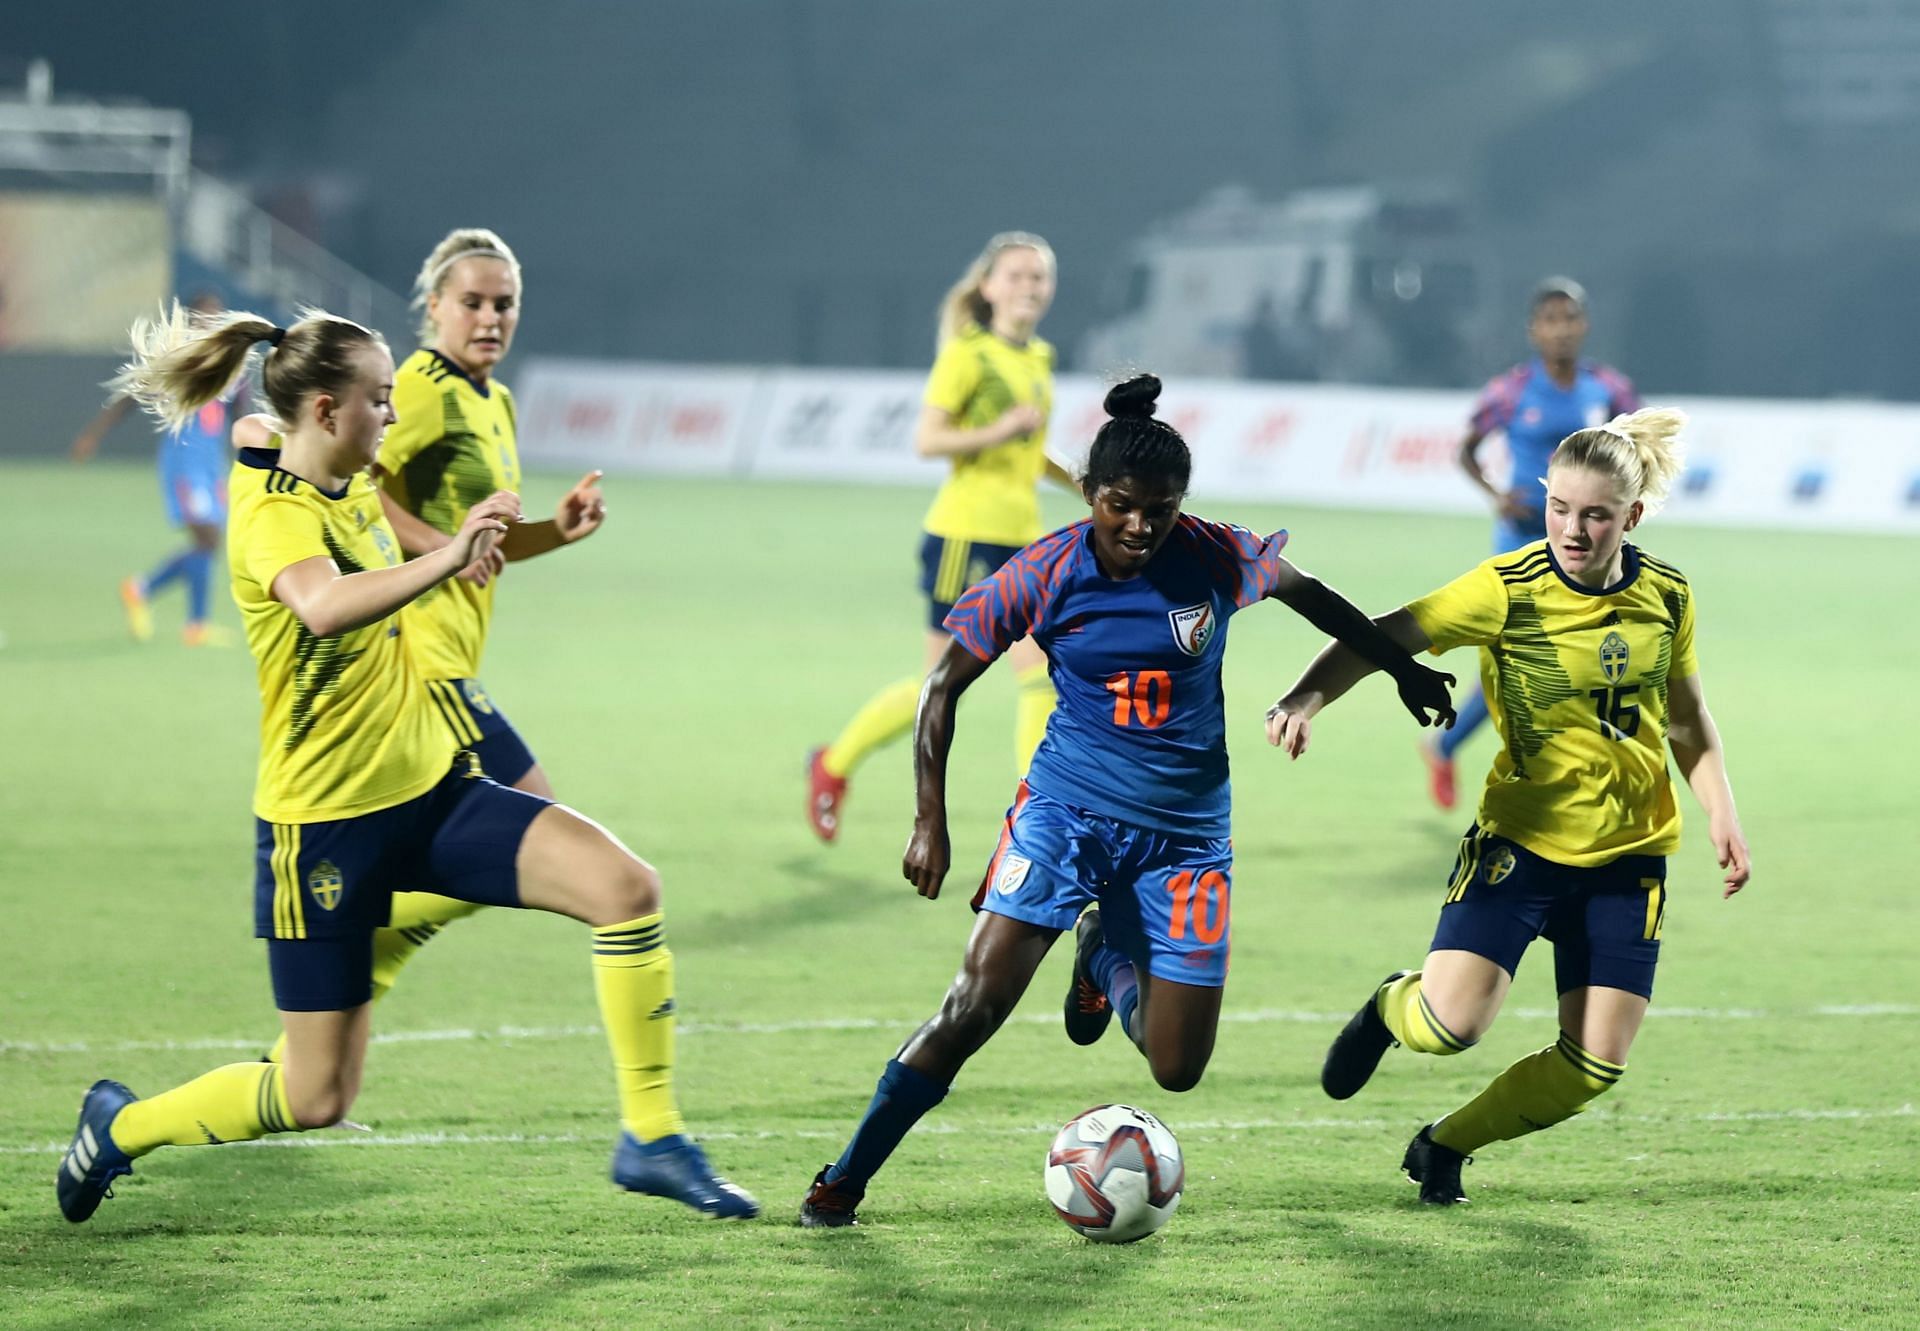 Sumati Kumari is known for her dynamism in the final third. (Image - AIFF)